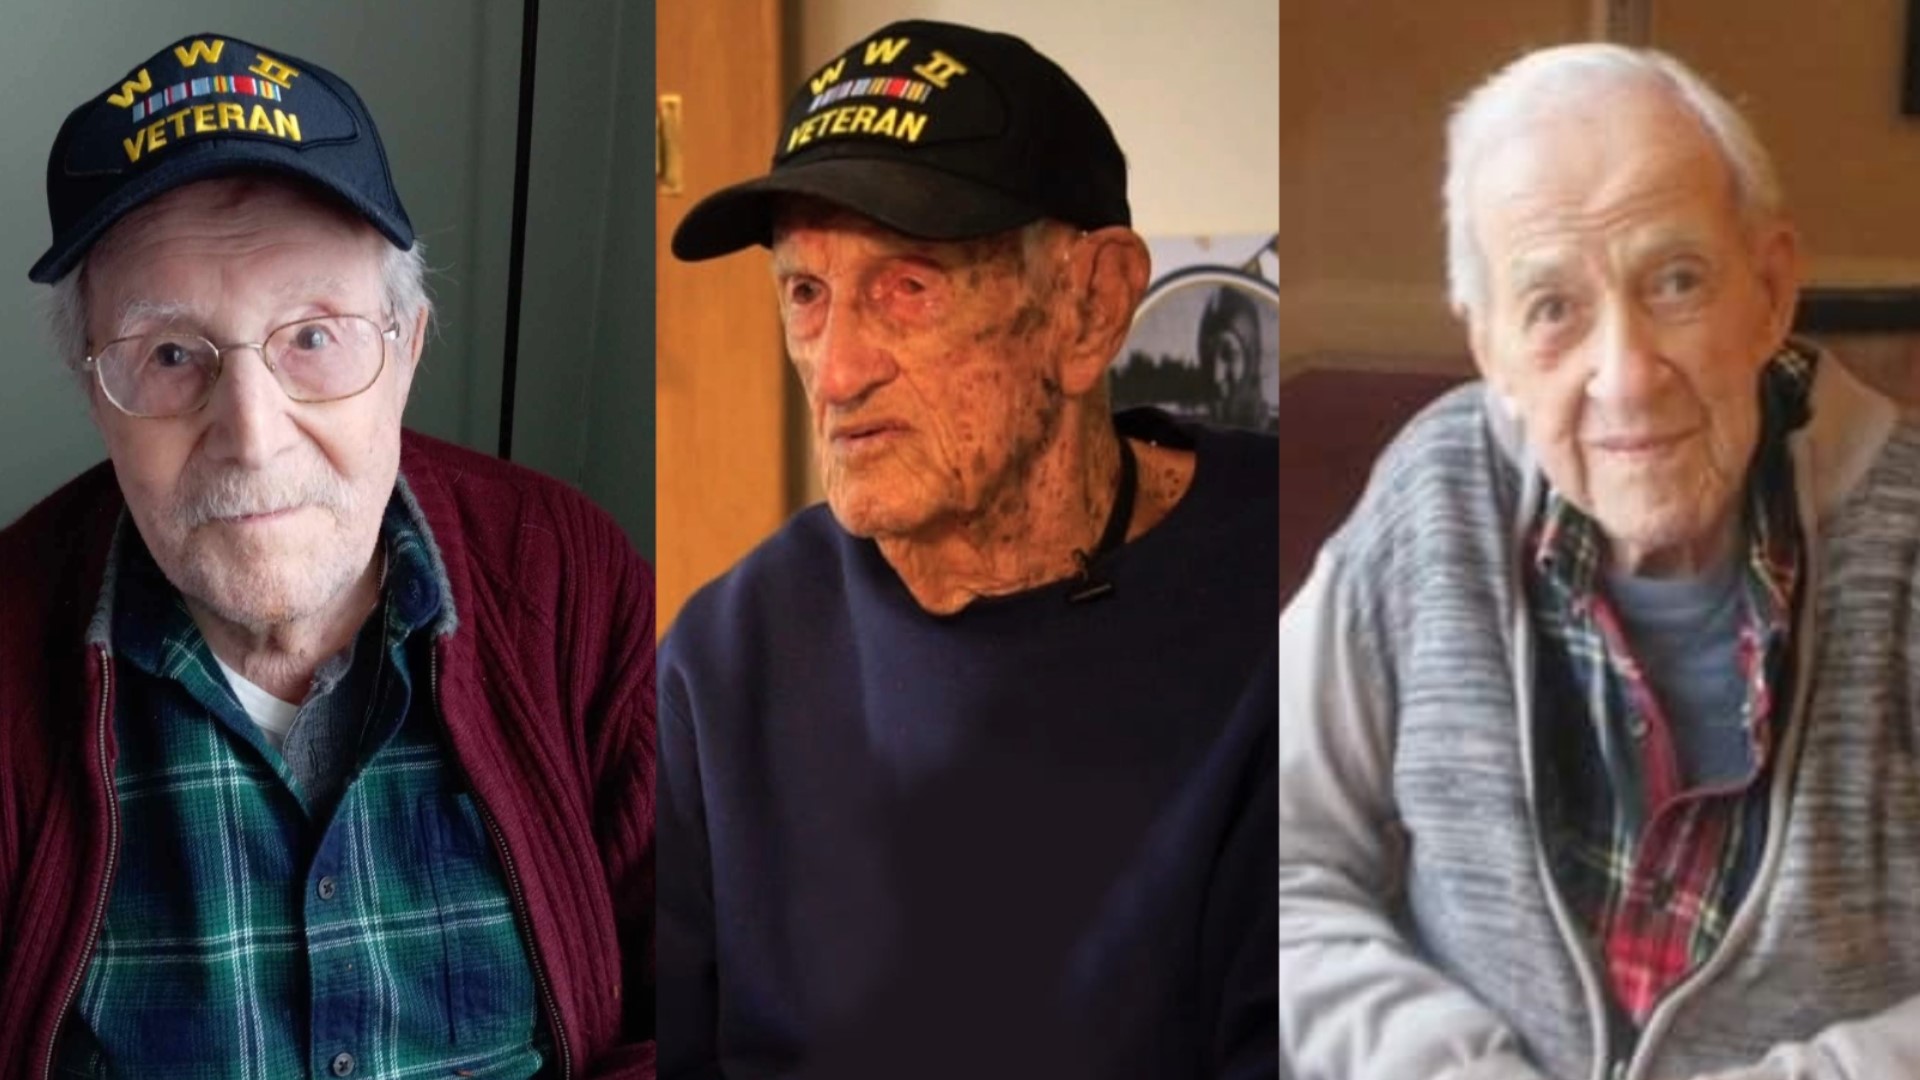 Three veterans from Maine are getting ready to celebrate their birthdays in March.